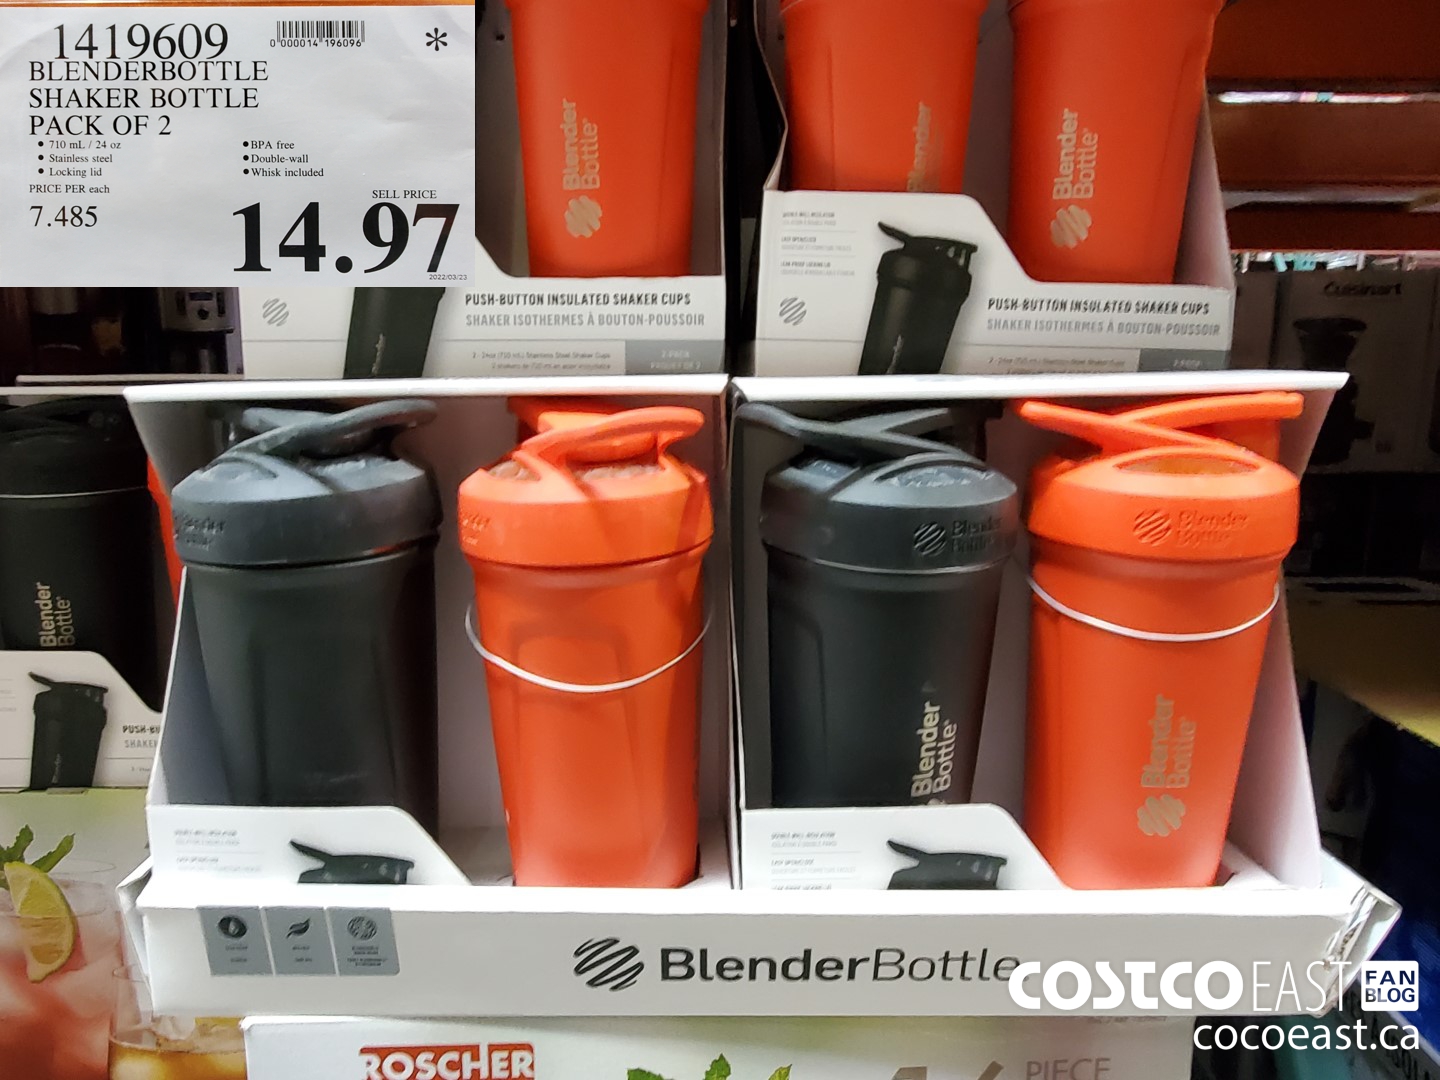 Costco] BlenderBottle 2-in-1 Bottle and Straw Cleaning Brush 2-pack $9.99  YMMV - RedFlagDeals.com Forums